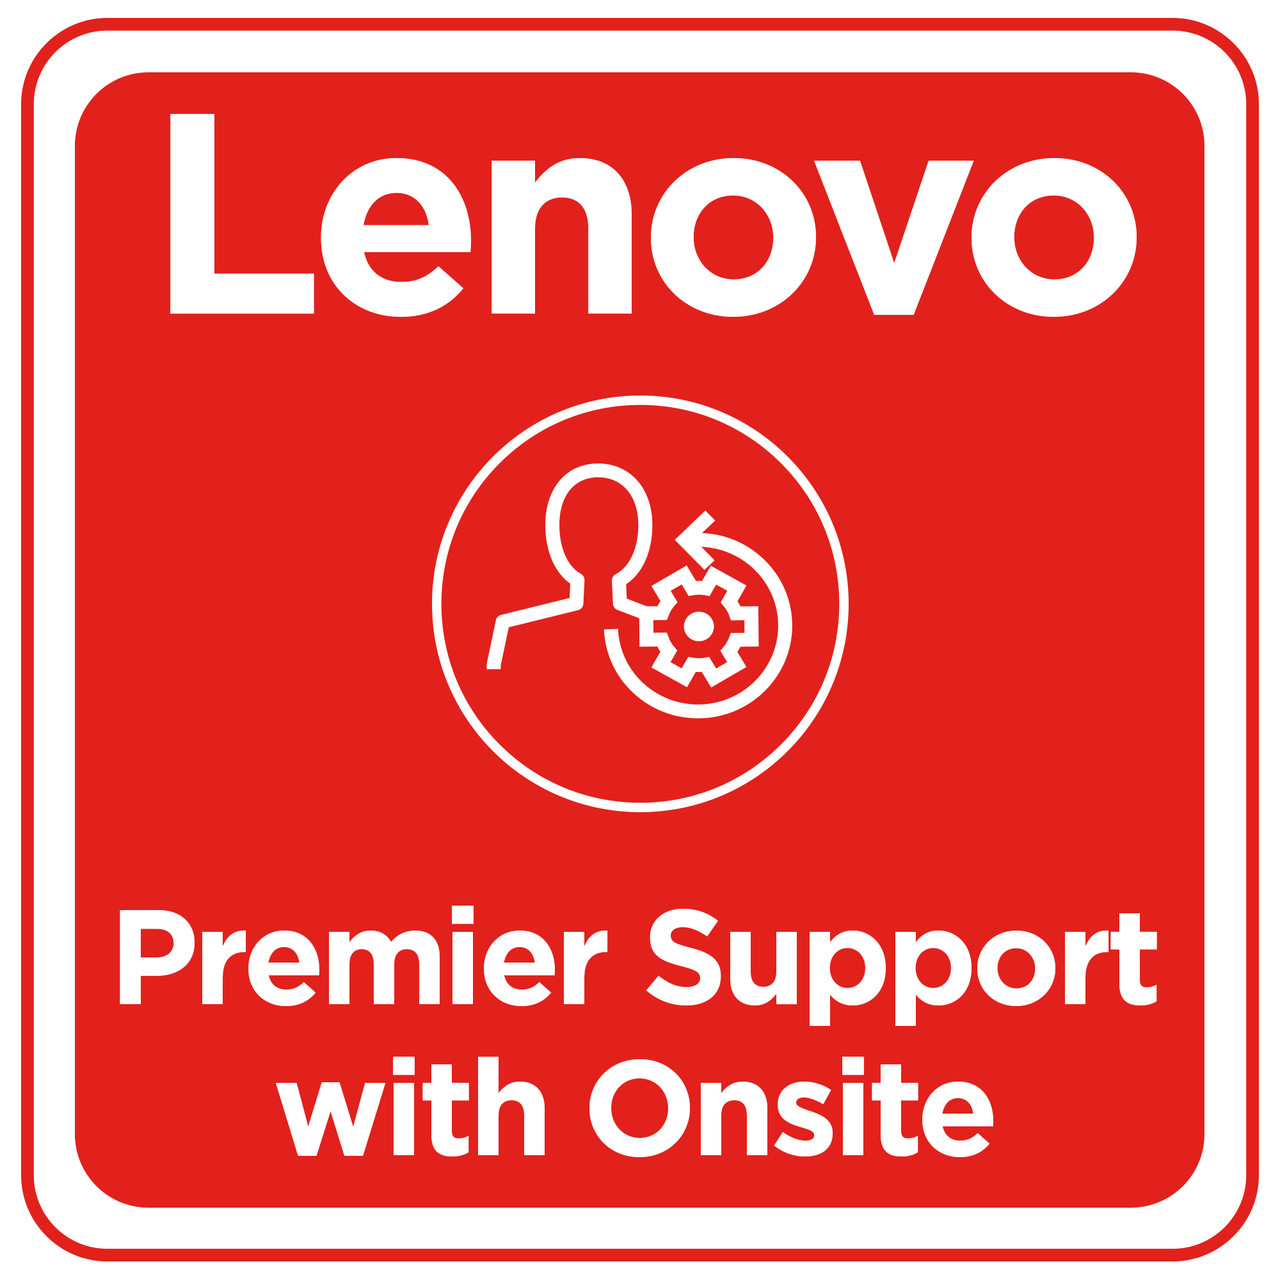 Lenovo Premier Support - Extended service agreement - parts and labour - 4 years - on-site - response time: NBD - for ThinkStation P300, P310, P320, P330, P330 Gen 2